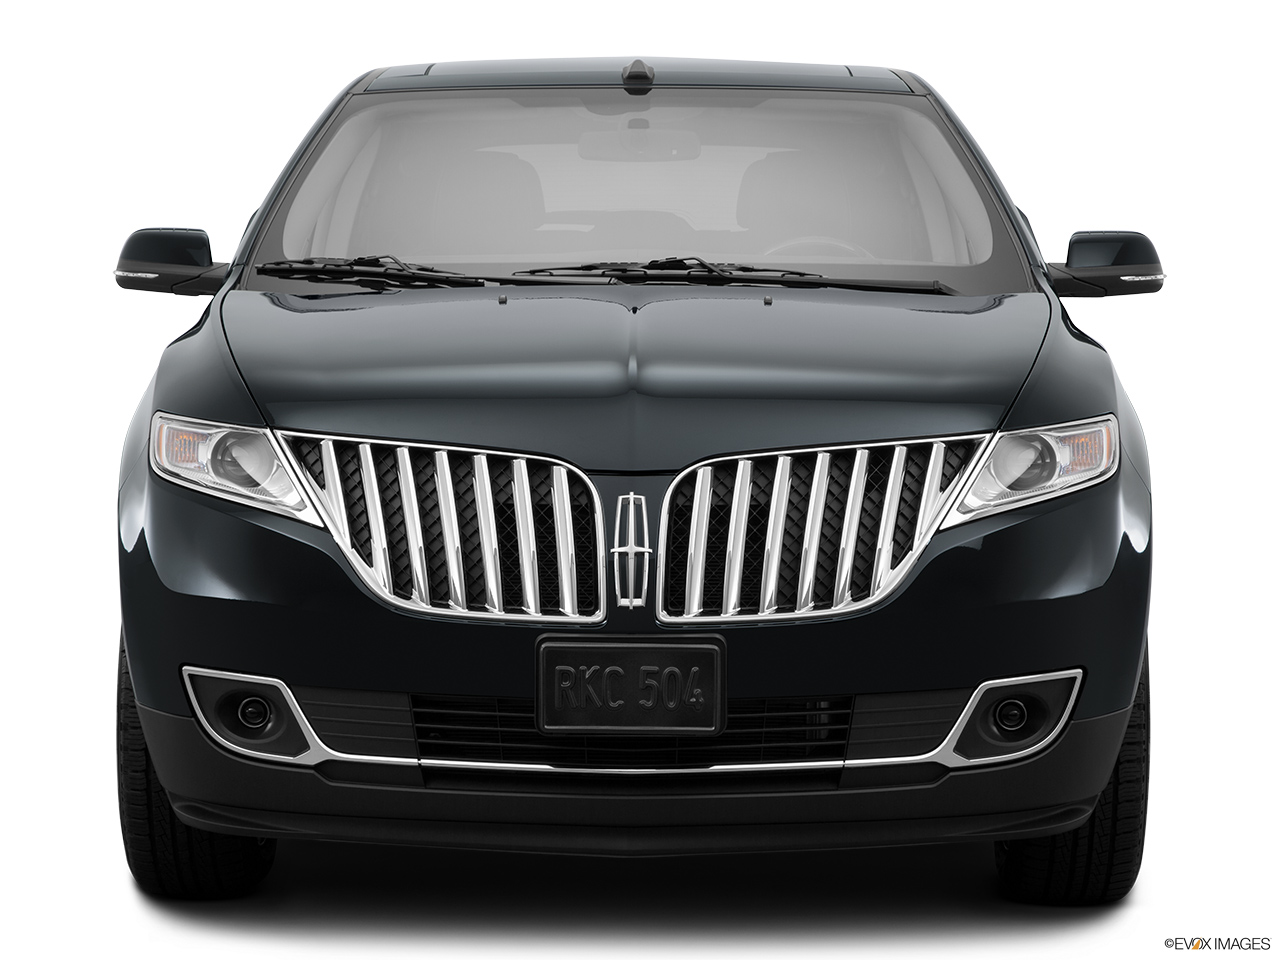 2015 Lincoln MKX FWD Low/wide front. 